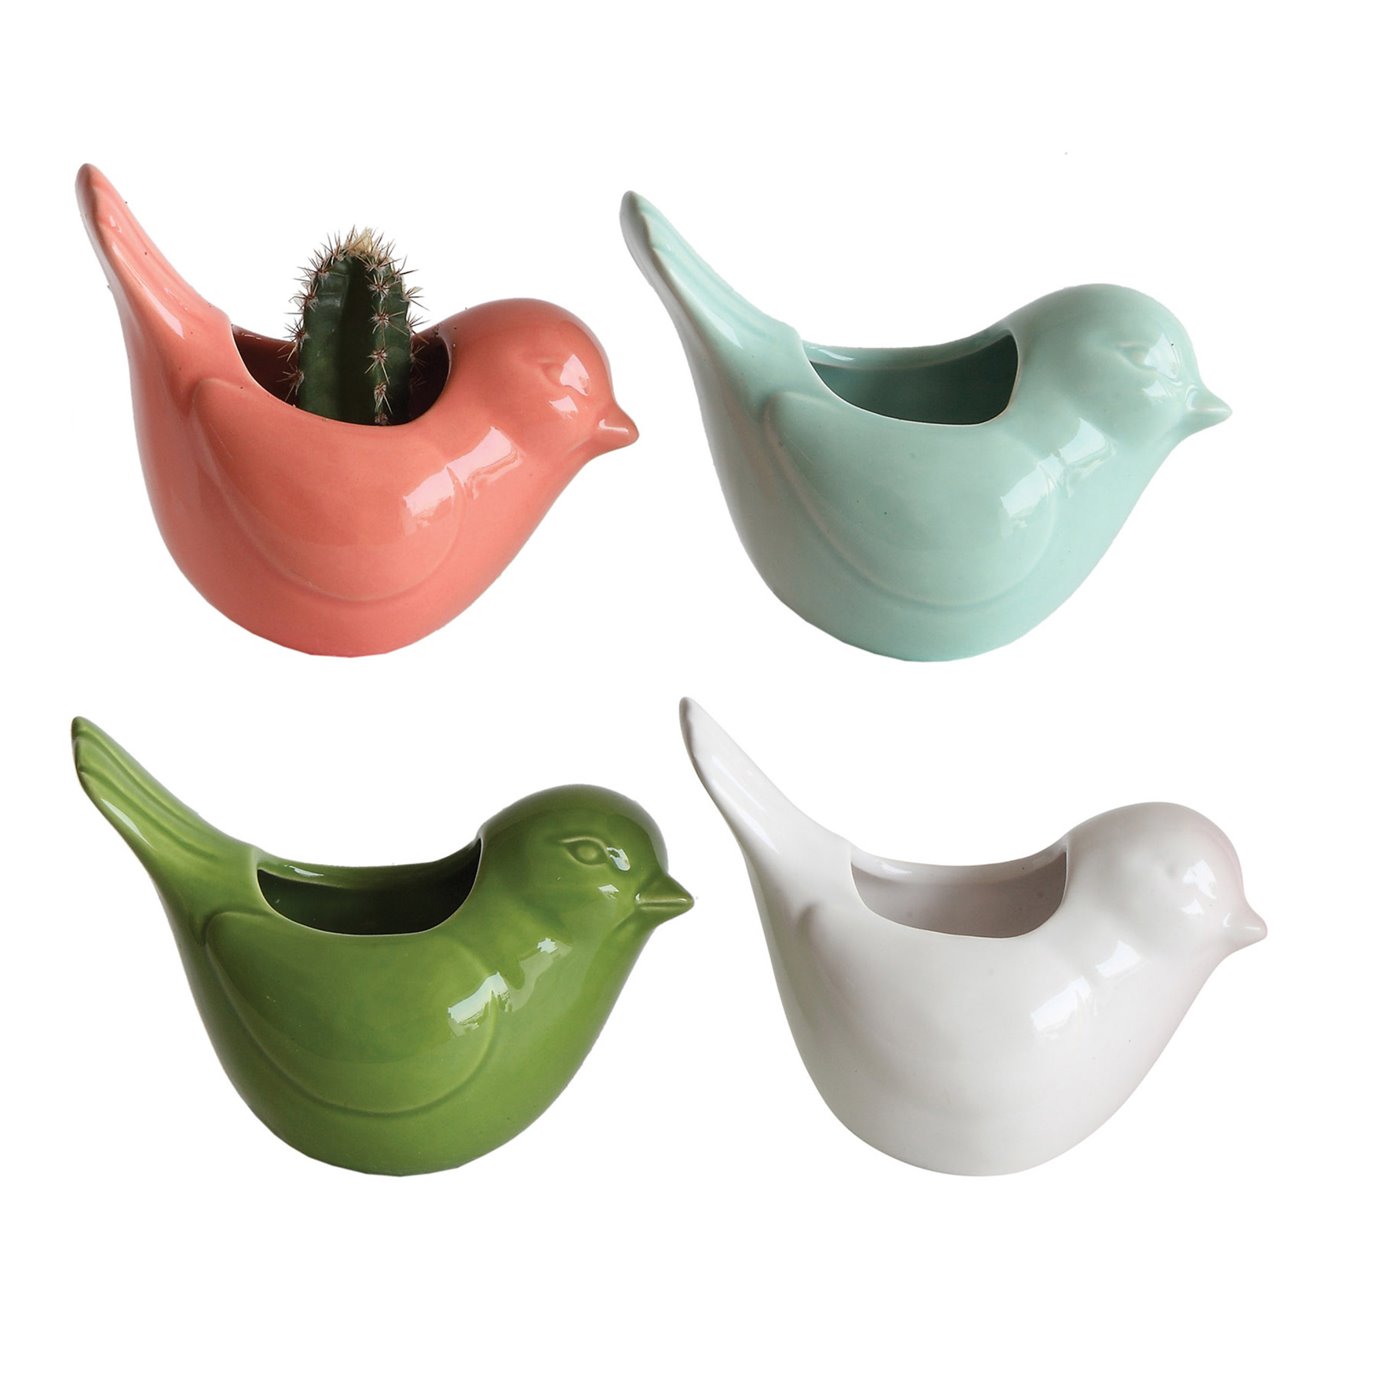 Stoneware Bird Shaped Vases with Magnets (Set of 4 Colors)